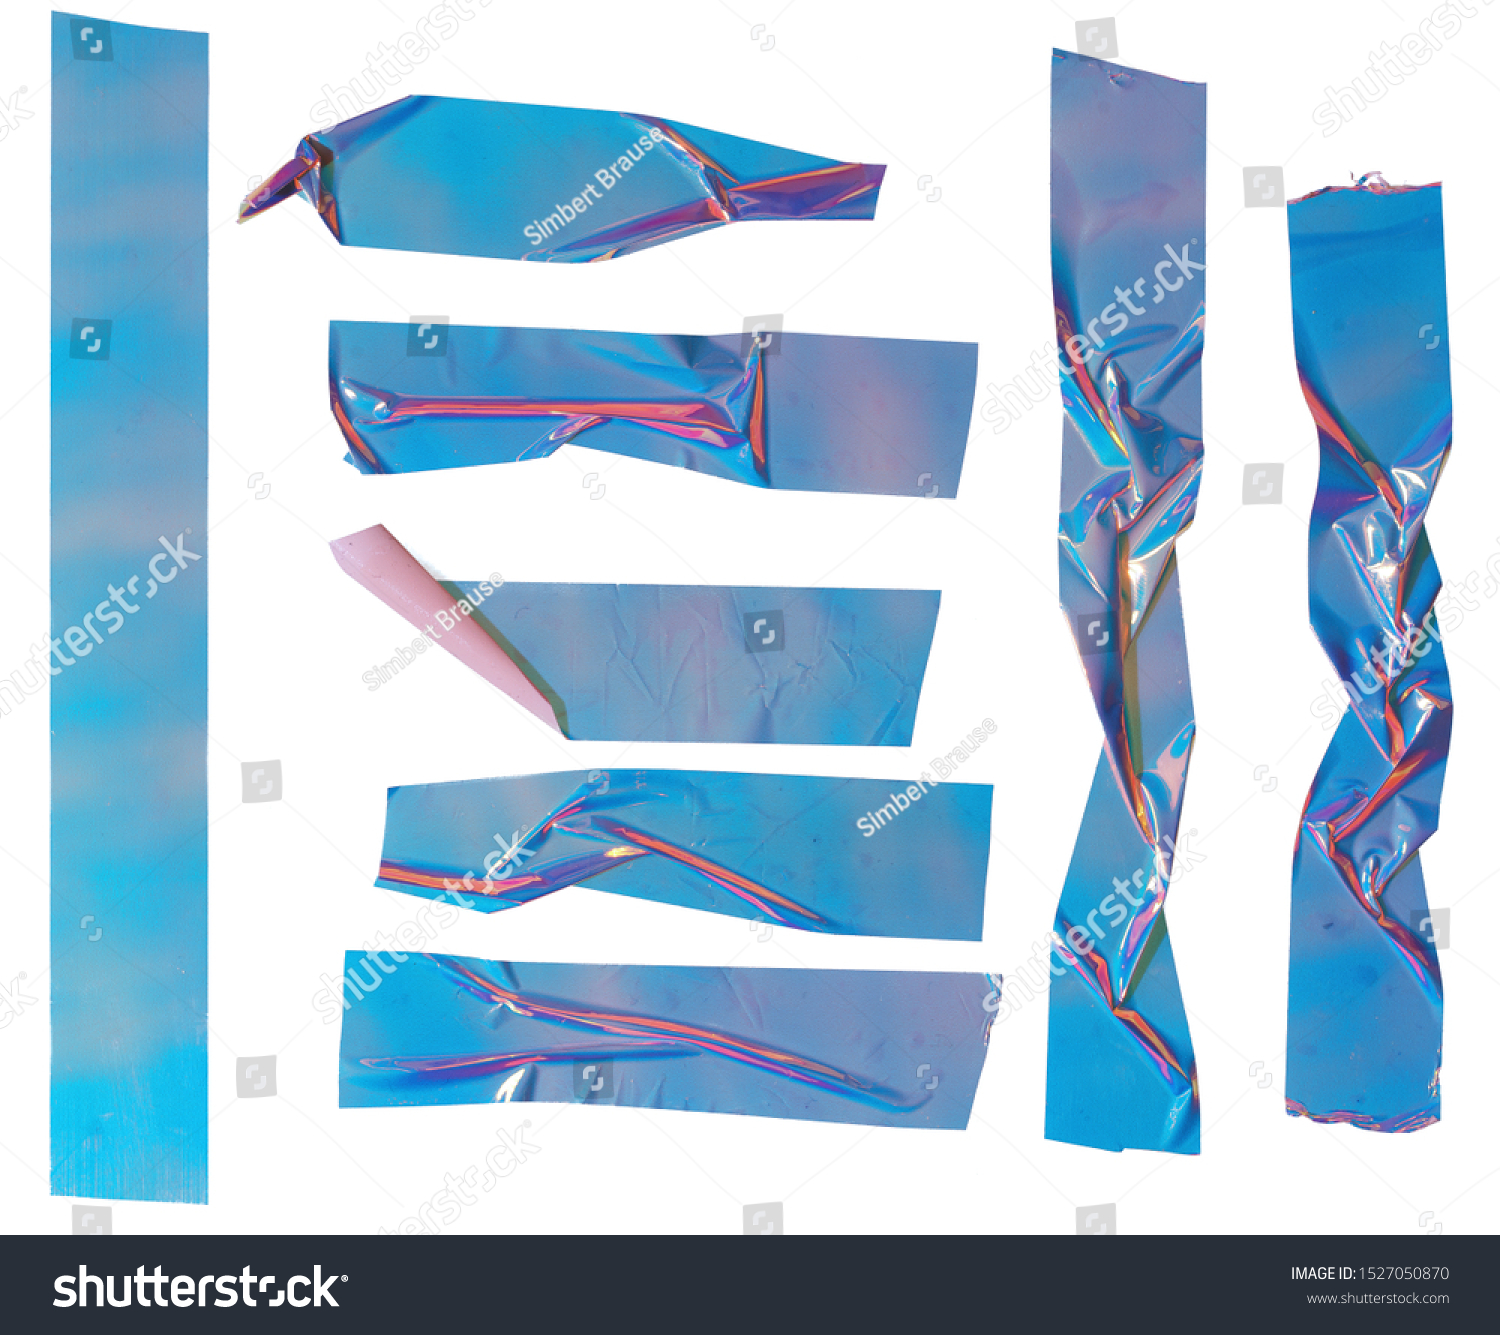 Shiny blue crumpled stickers. Cool set of metallic holographic sticky tape shapes isolated on white background. Holo glitter stripes or snips. #1527050870